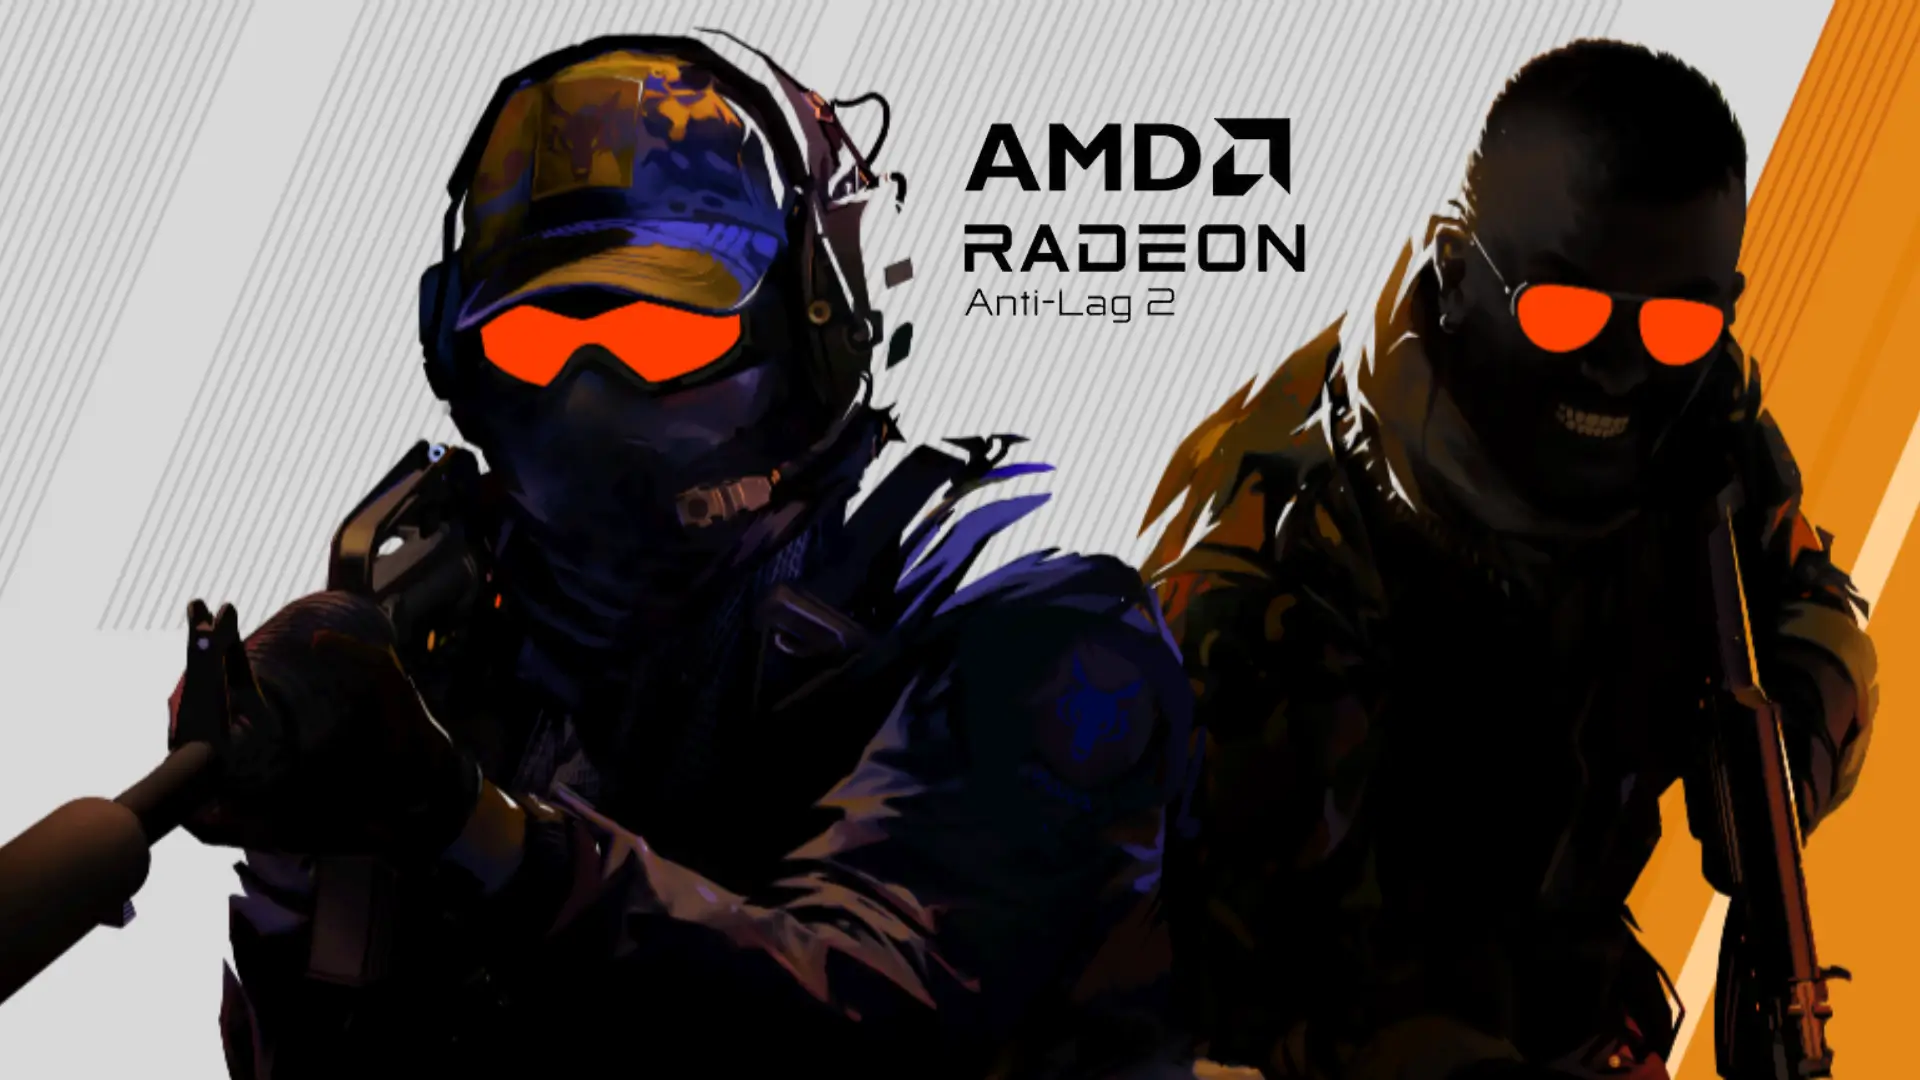 AMD Introduces Radeon Anti-Lag 2 with Game-Integrated Technology, Debuts in Counter-Strike 2